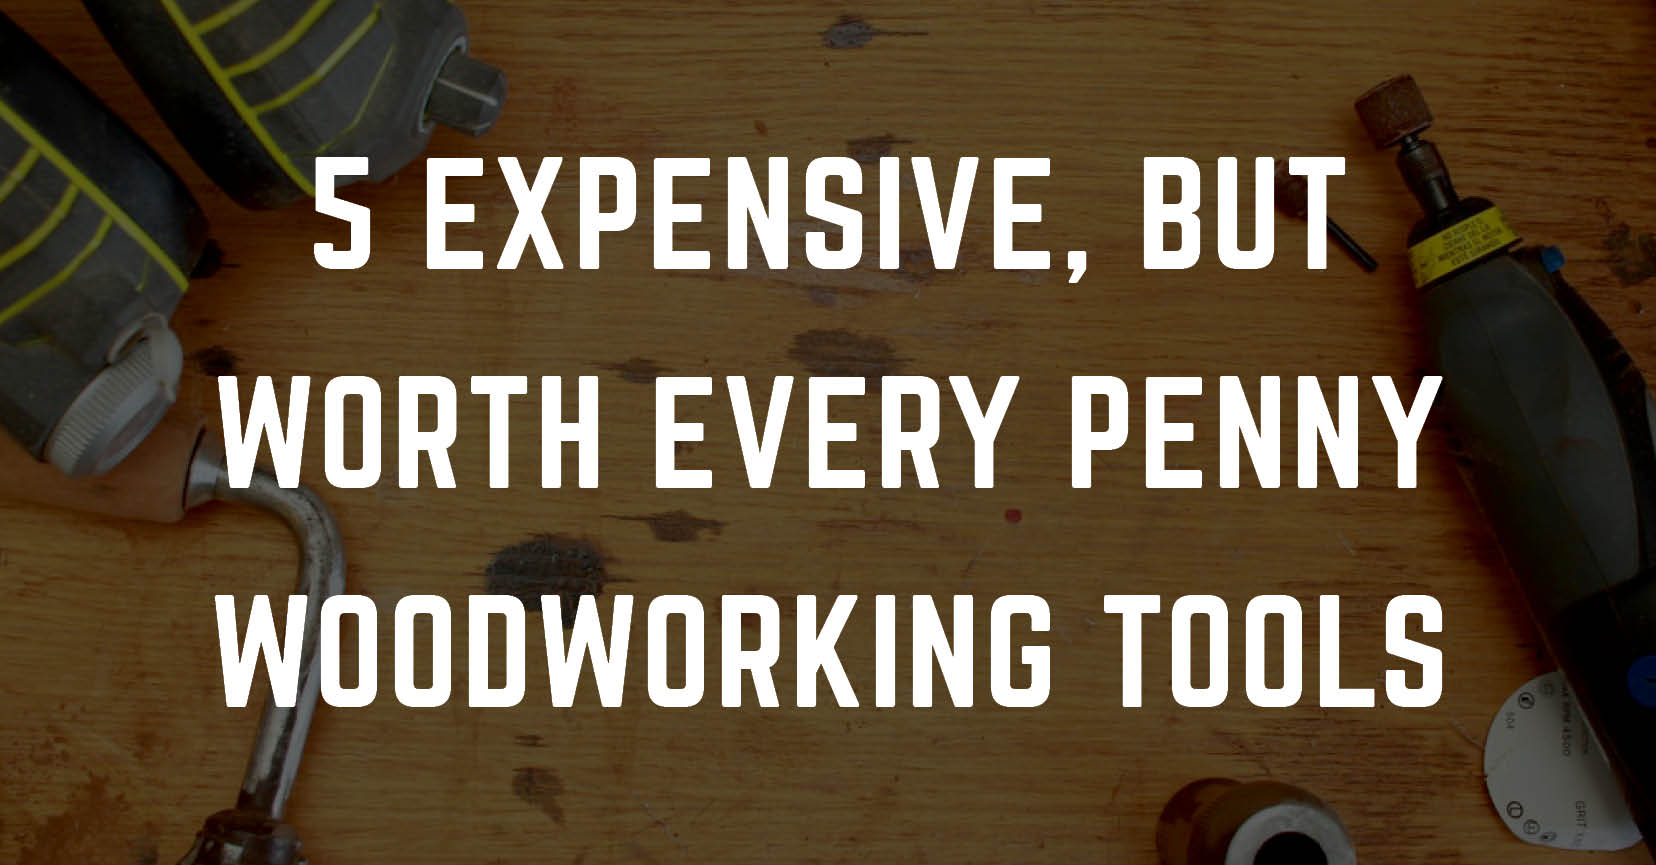 5 EXPENSIVE, BUT WORTH EVERY PENNY WOODWORKING TOOLS